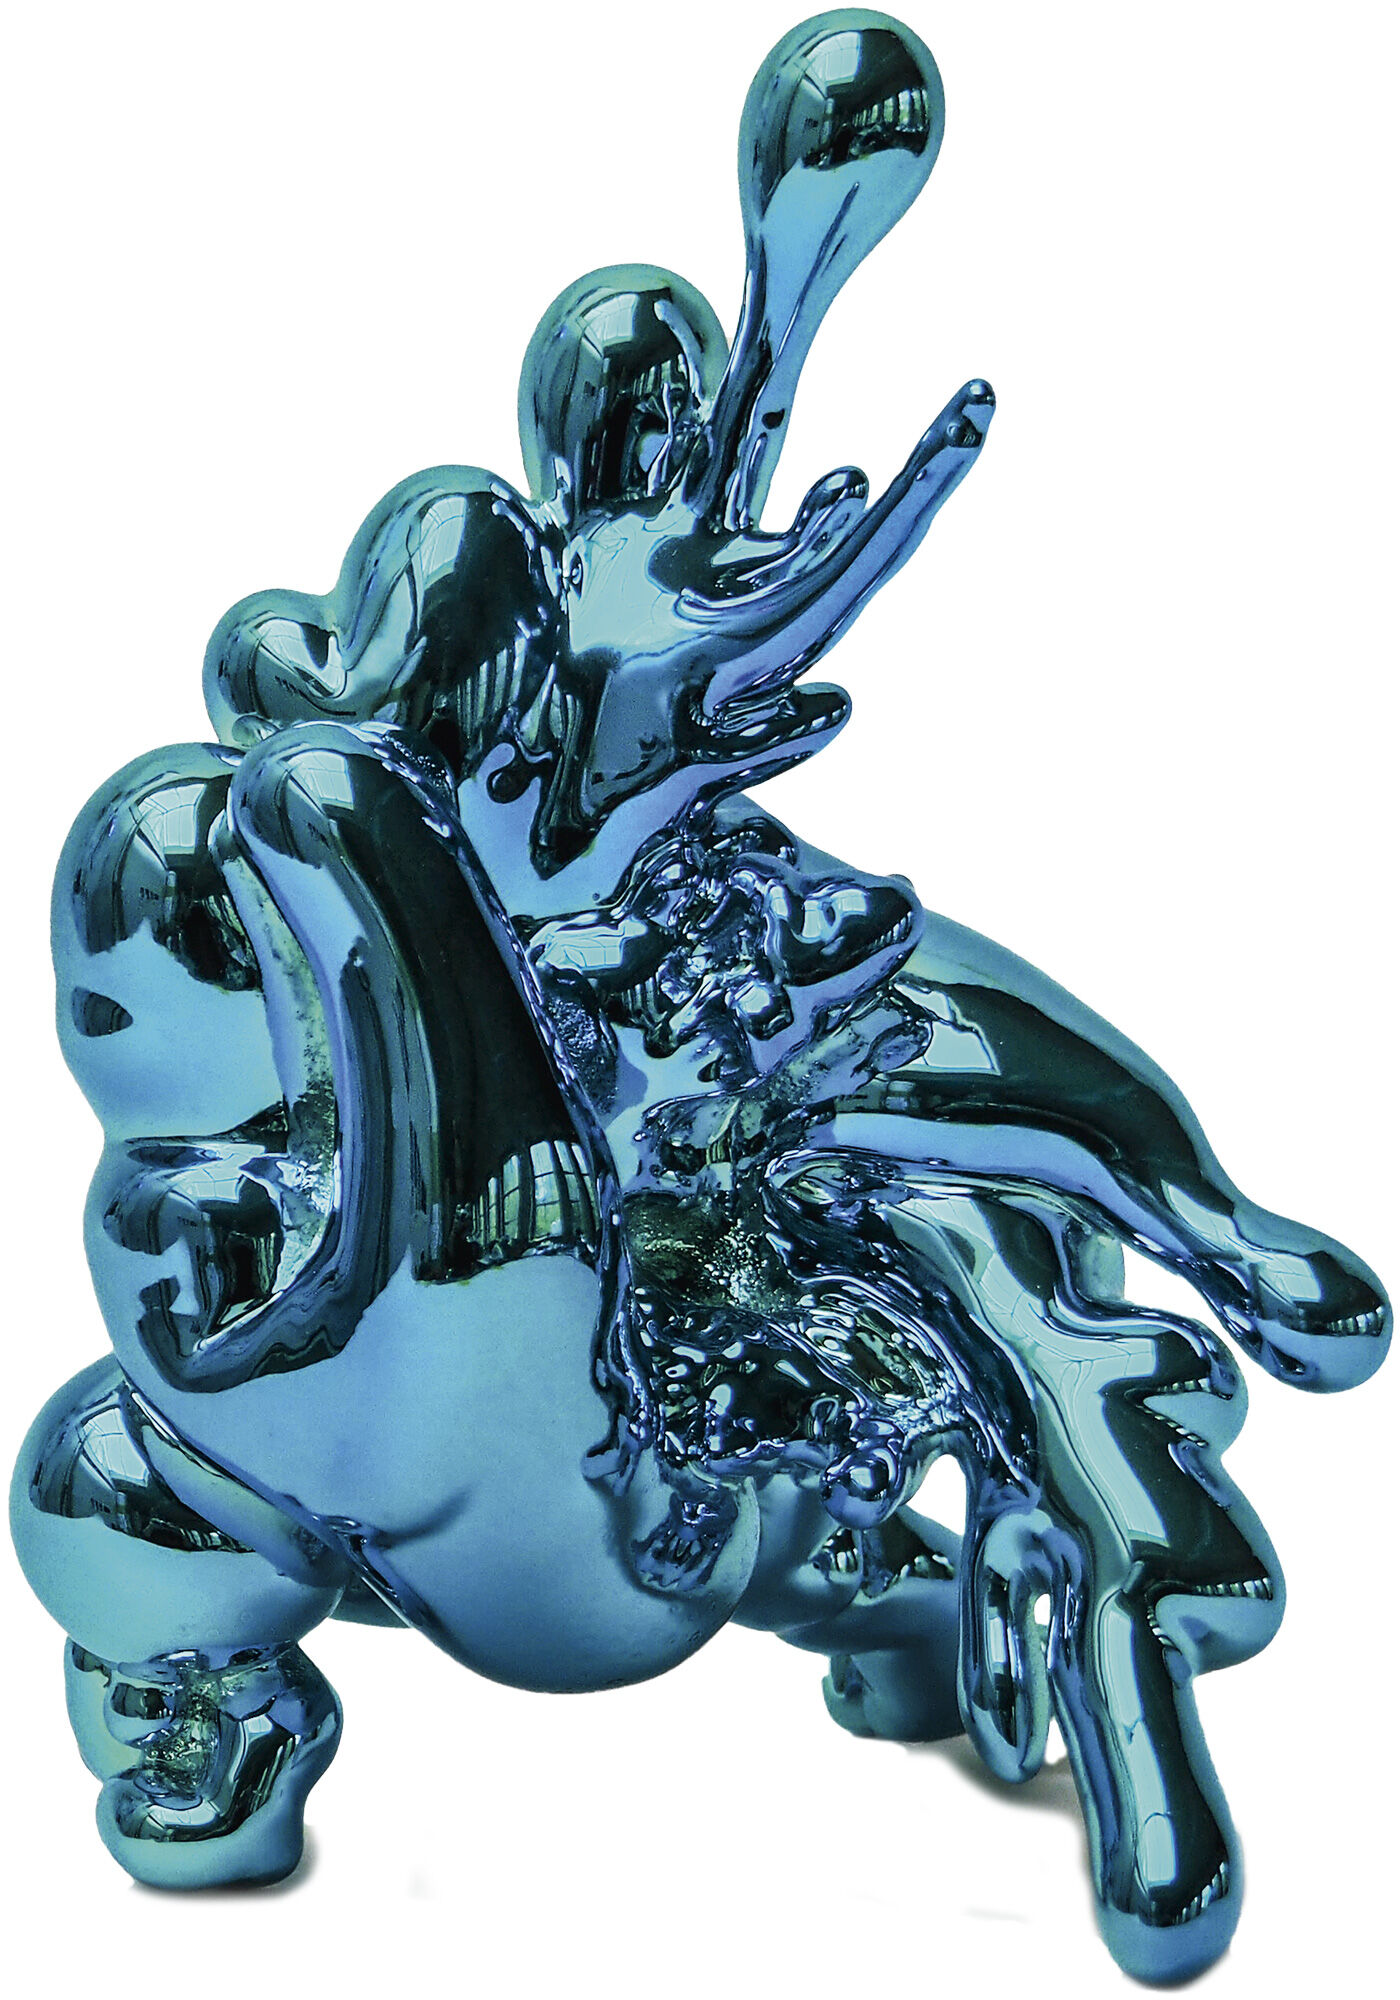 Sculpture "Implosion 18 #1 (blue)" (2014) by Ulrike Buhl